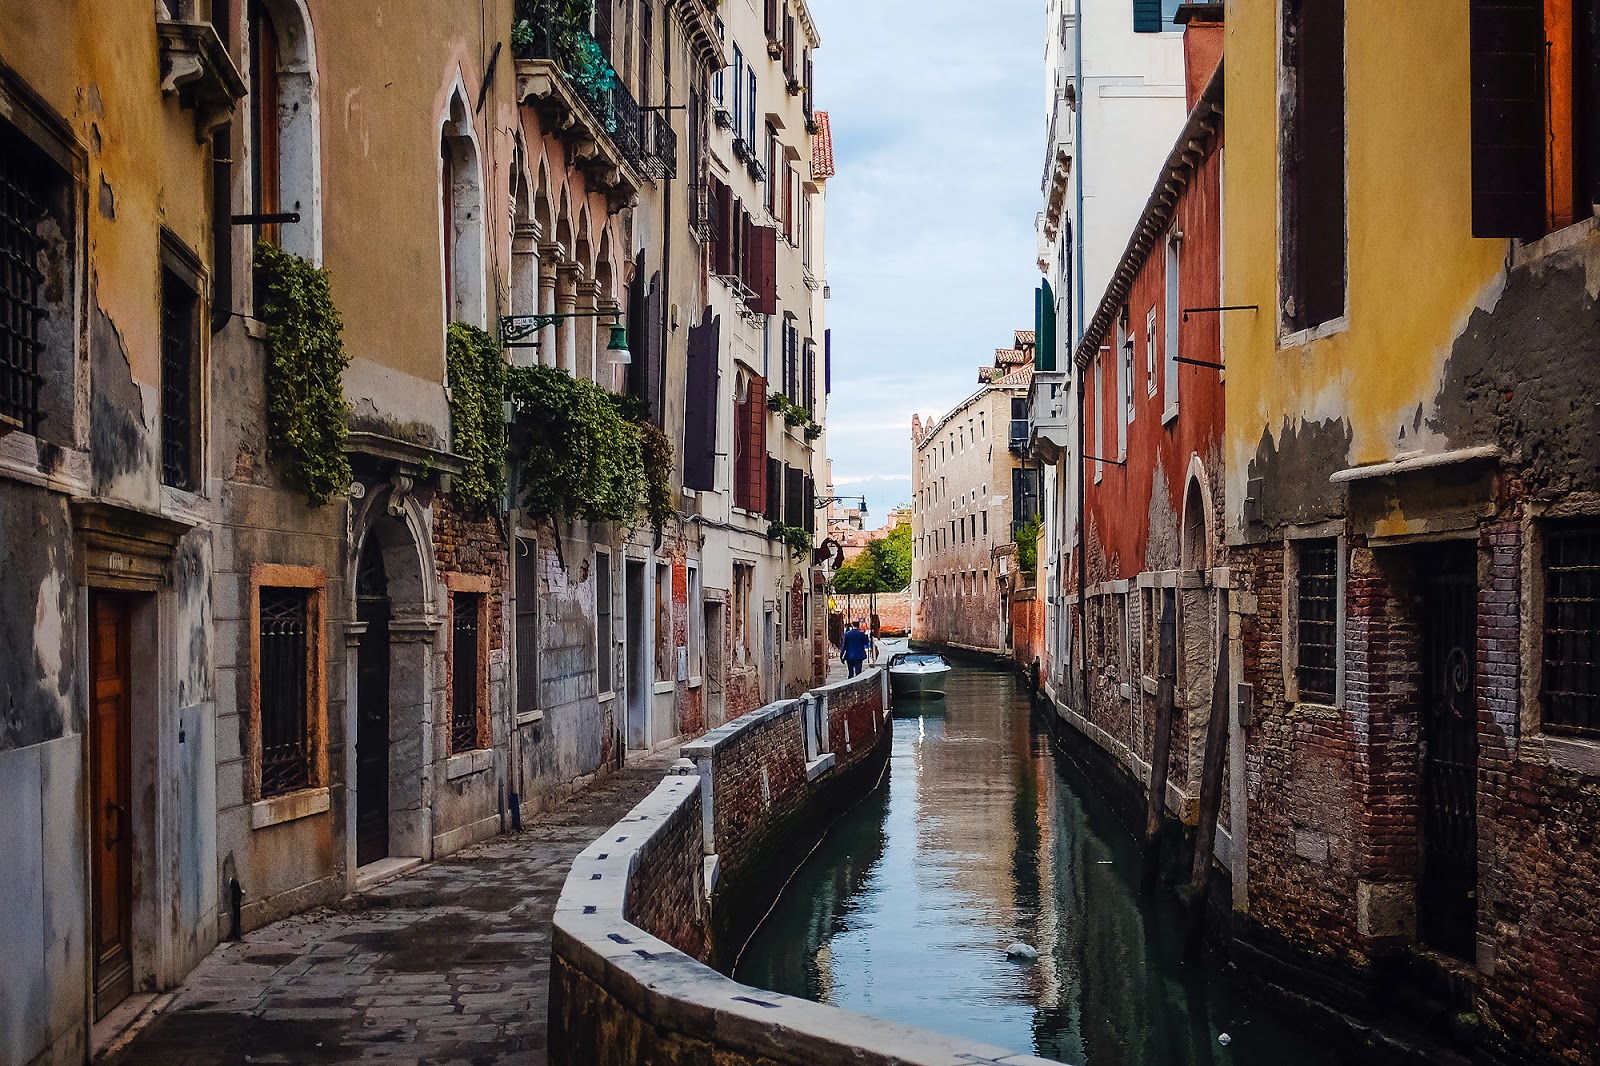 Fujifilm X100s Image of Venice by Willie Kers